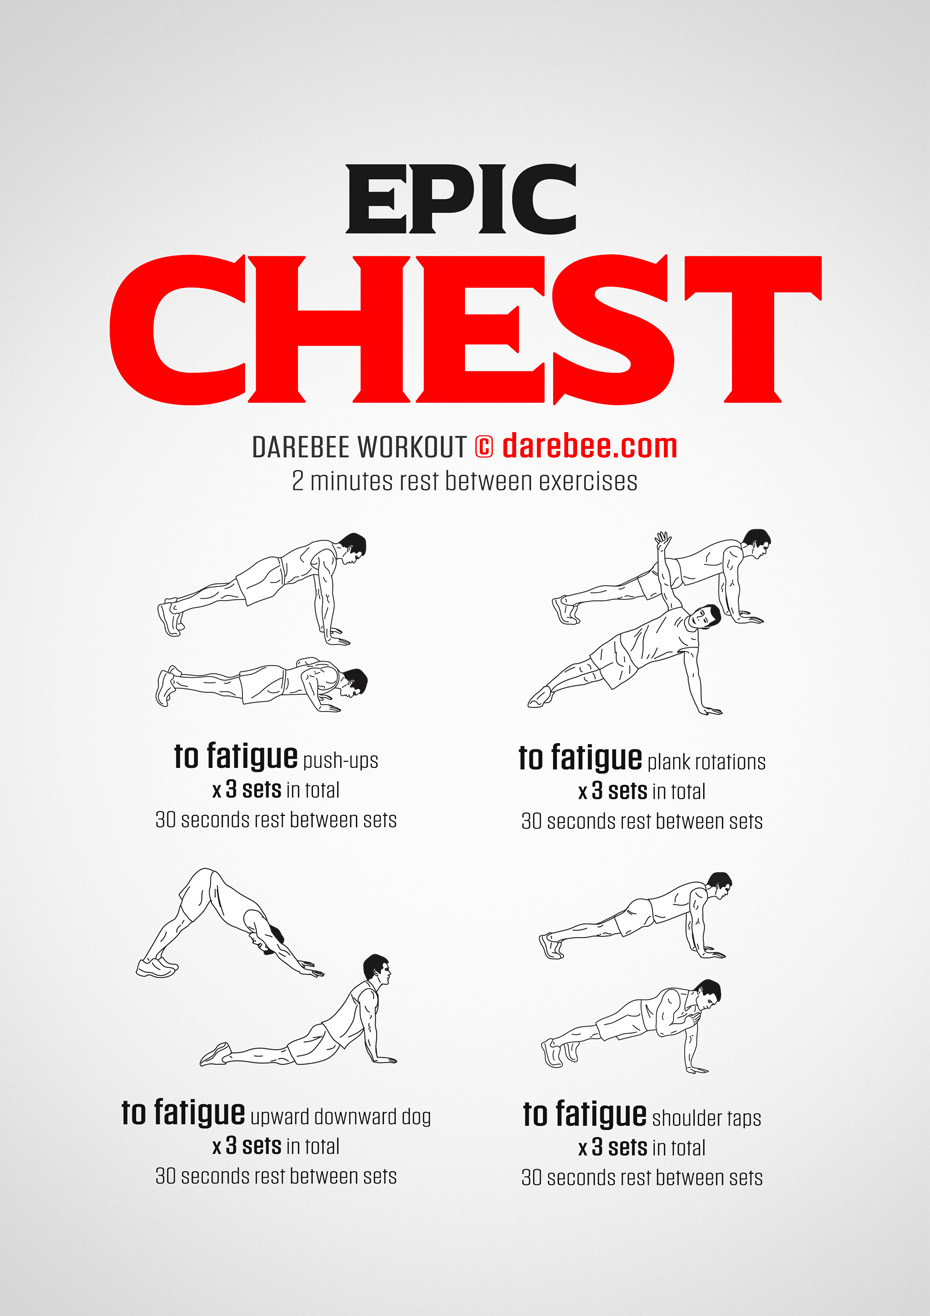 Epic Chest Workout